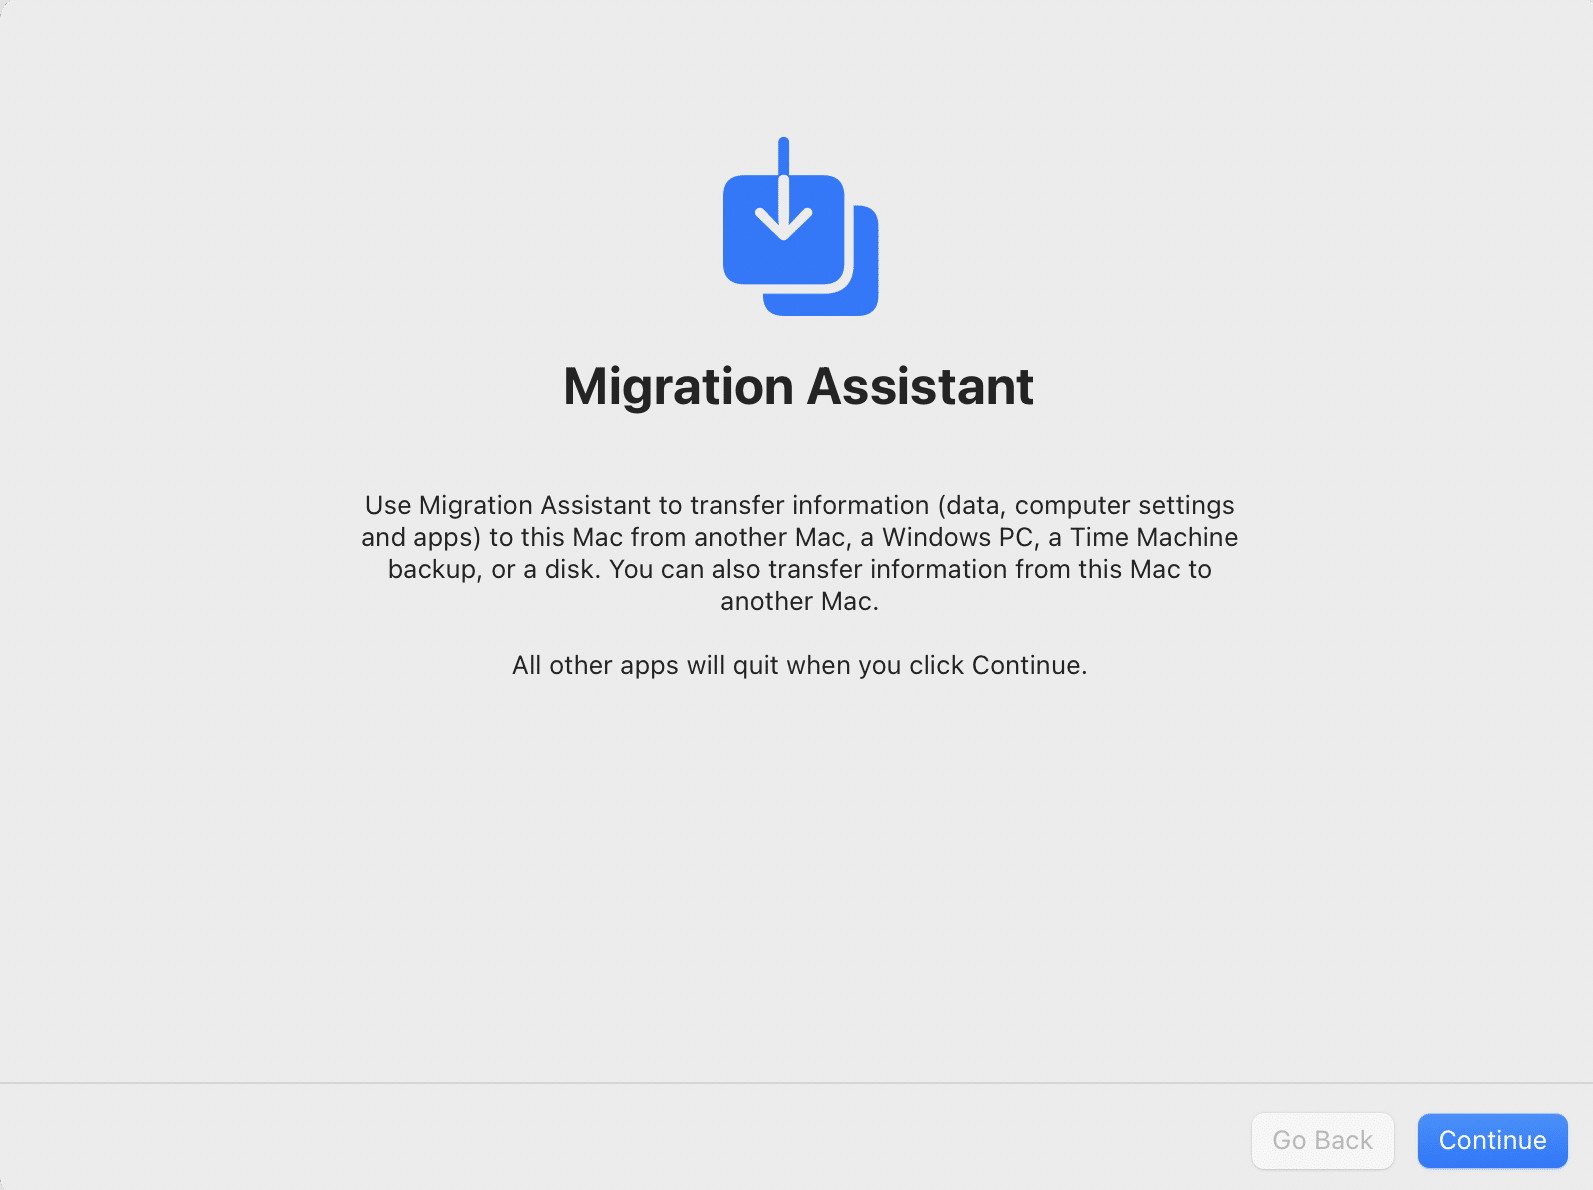 Migration Assistant on the new Mac